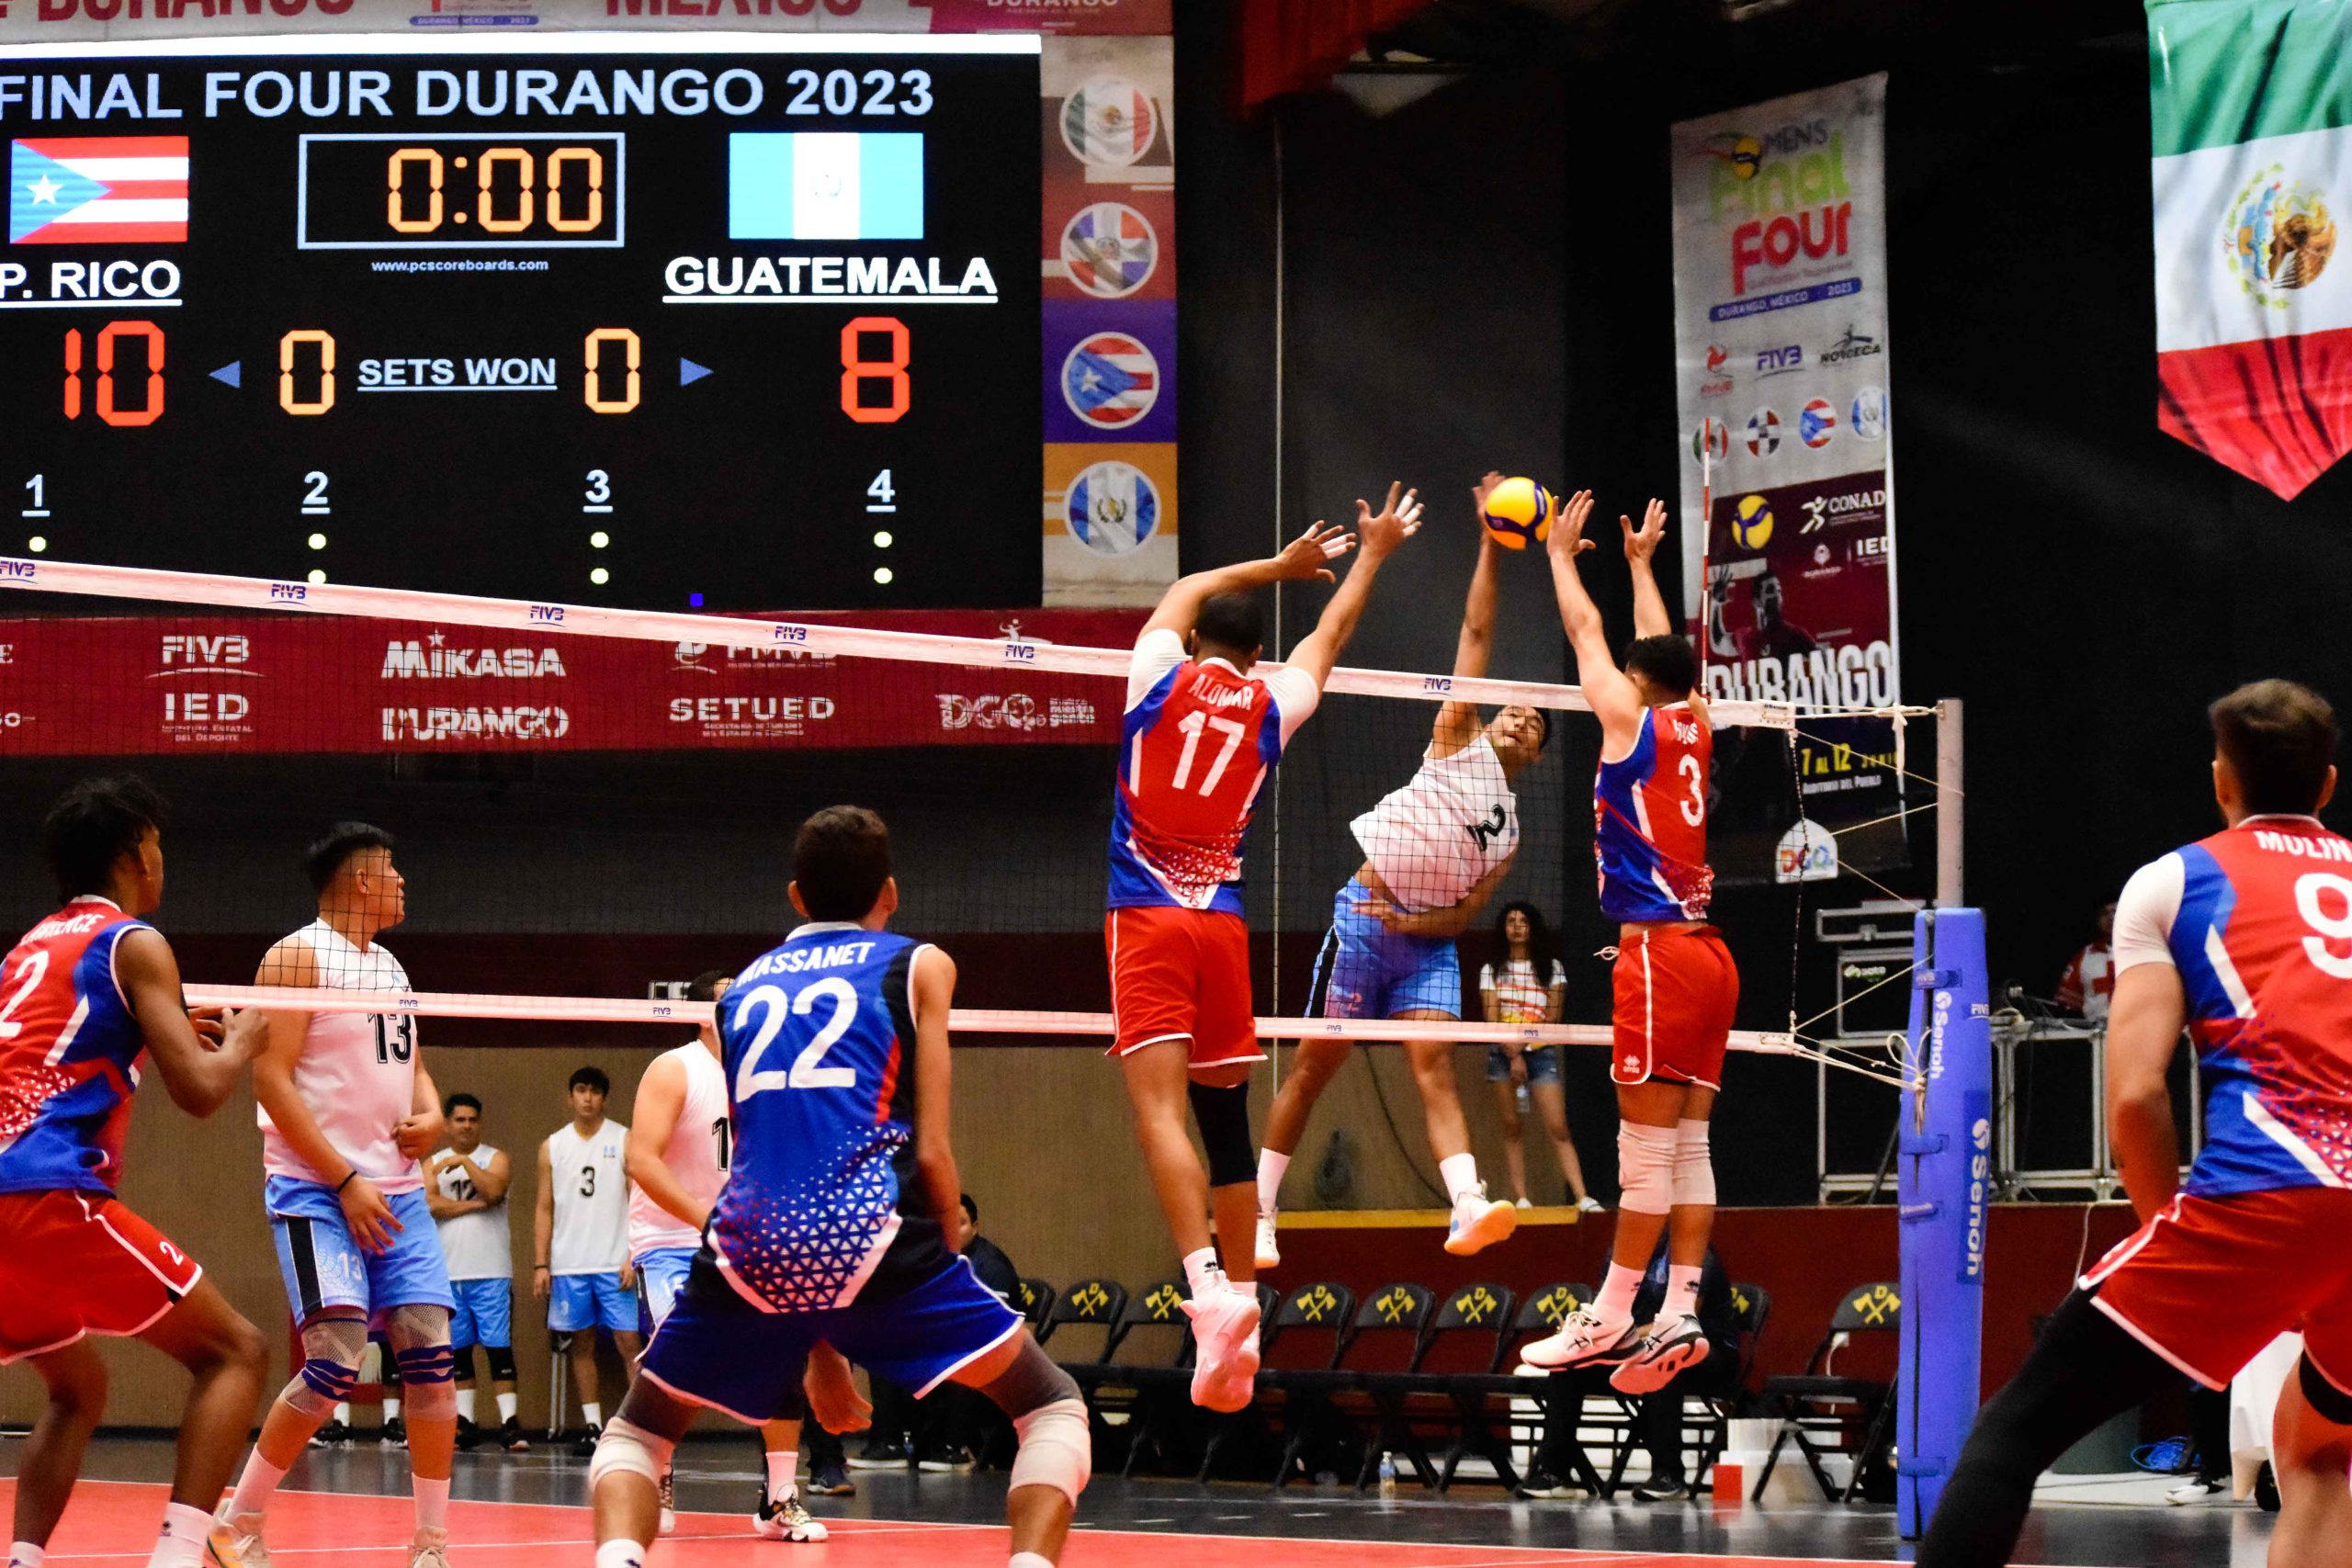 Puerto Rico earns first win at Men’s Final Four